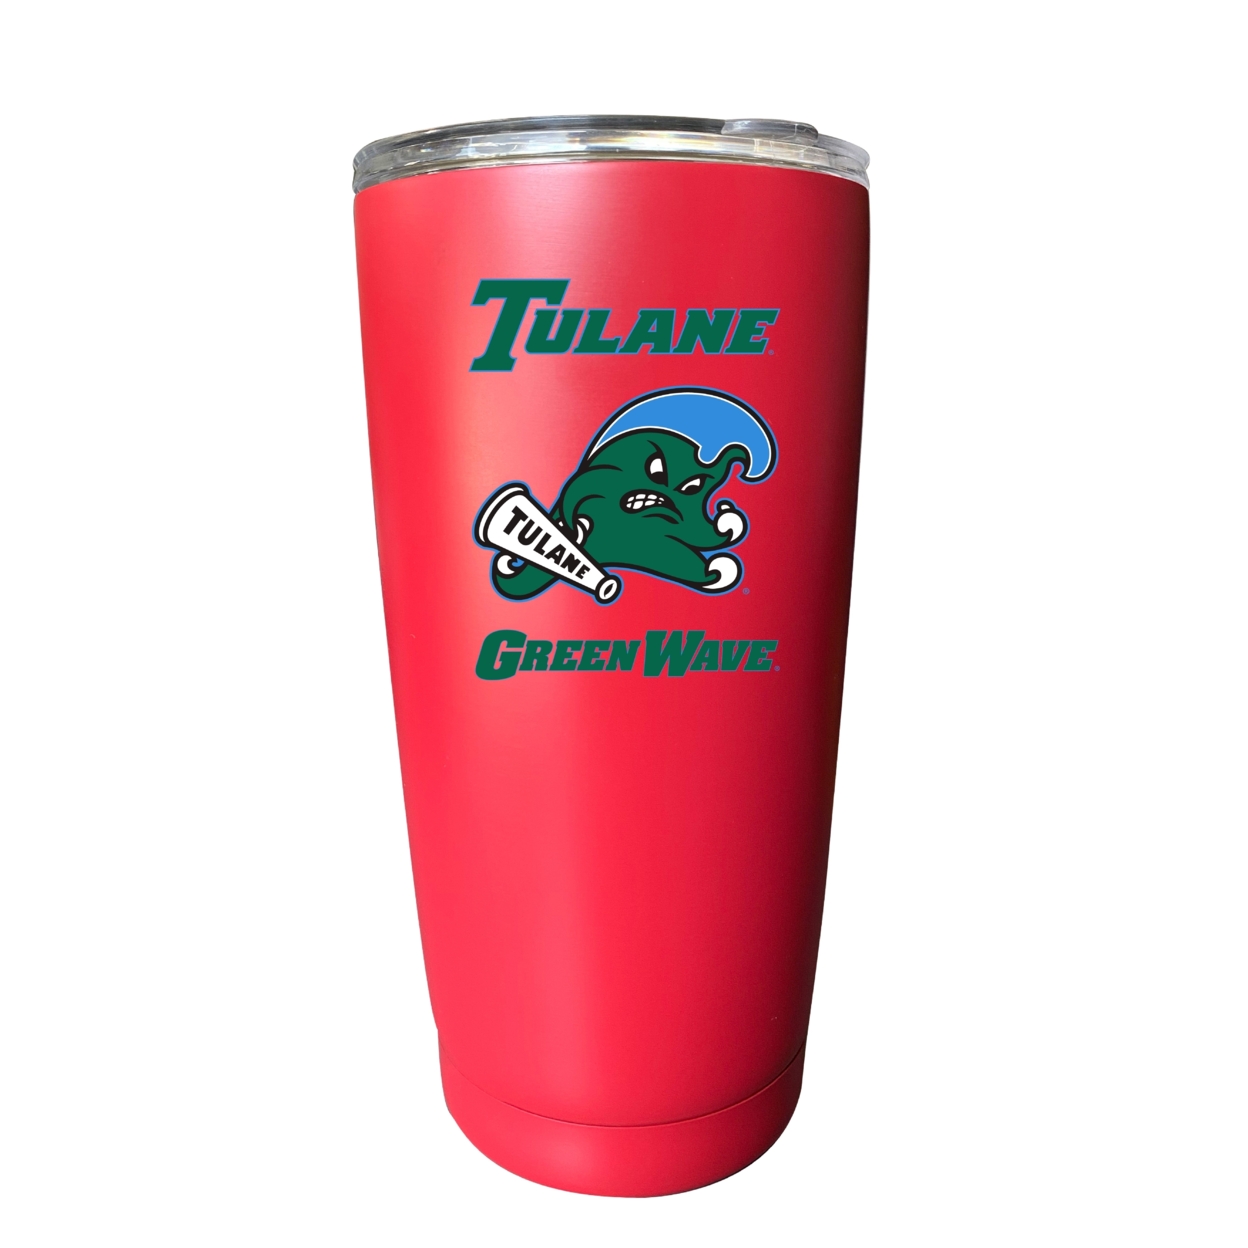 Tulane University Green Wave 16 Oz Insulated Stainless Steel Tumbler - Choose Your Color. - Red